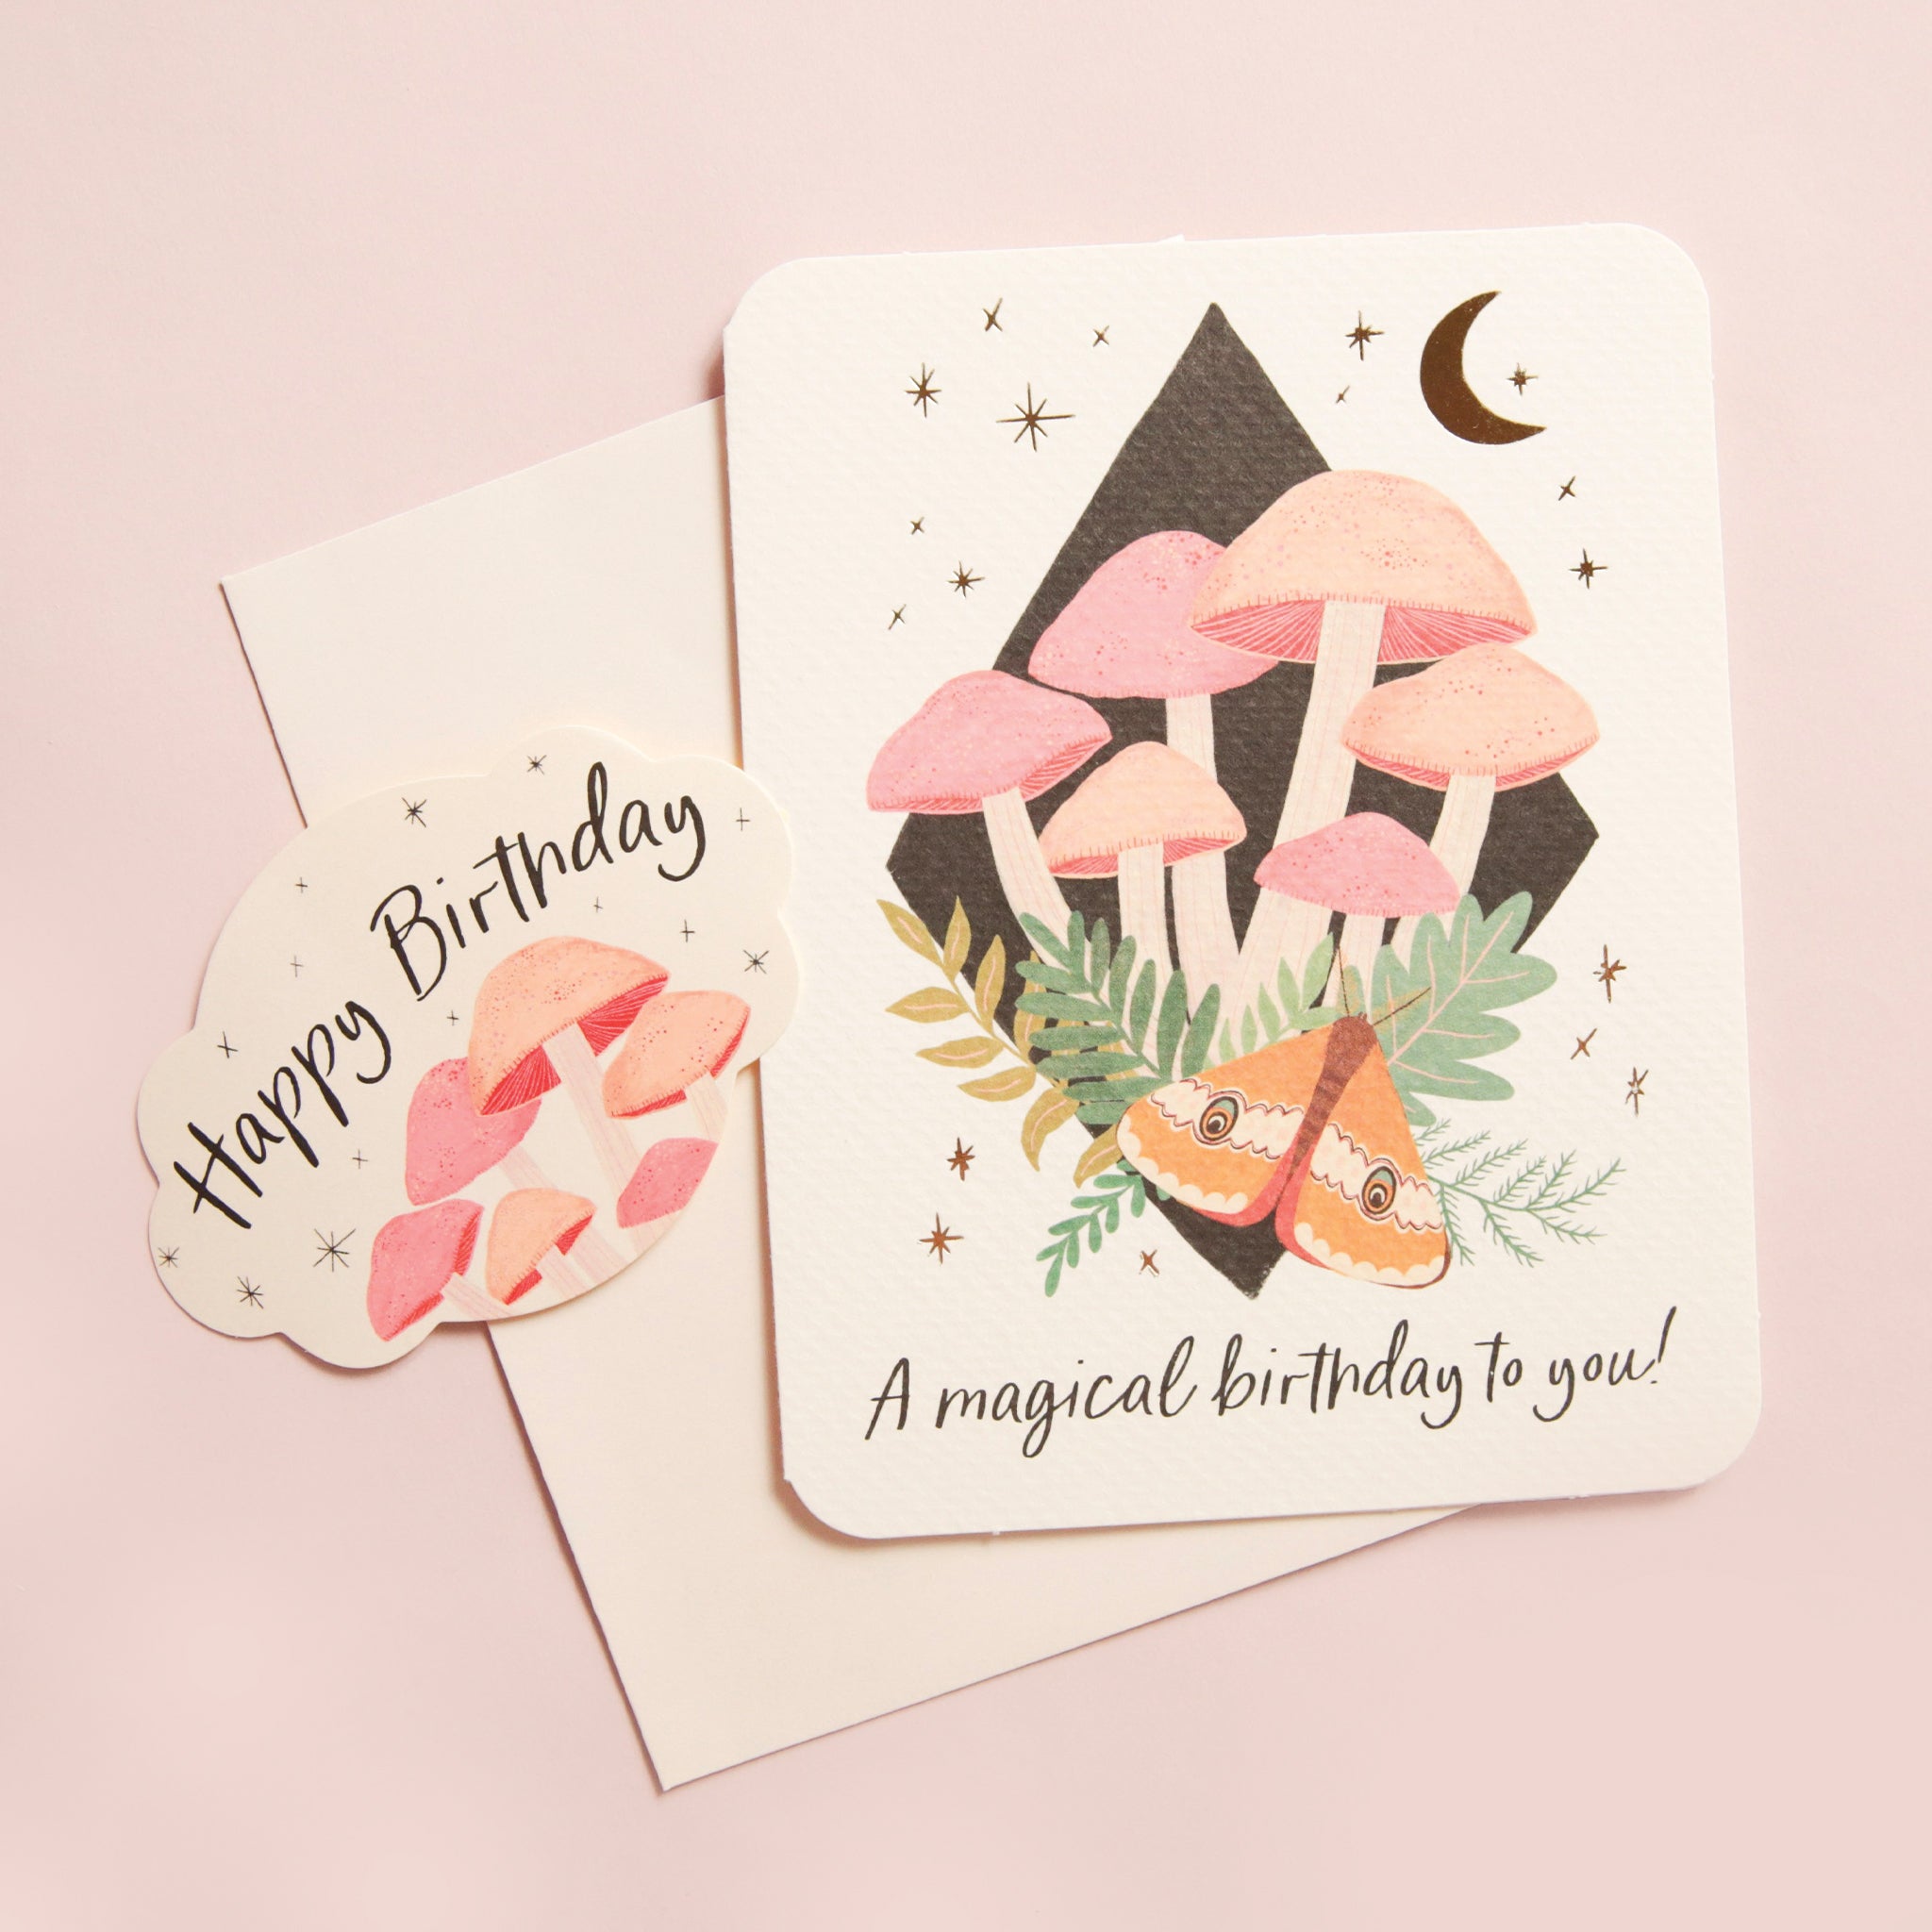 A cream colored card with a graphic of mushrooms, a moth and a moon along with &quot;A Magical Birthday to You&quot;. Also included is a coordinating cream envelope and a mushroom sticker that says, &quot;Happy Birthday&quot;.